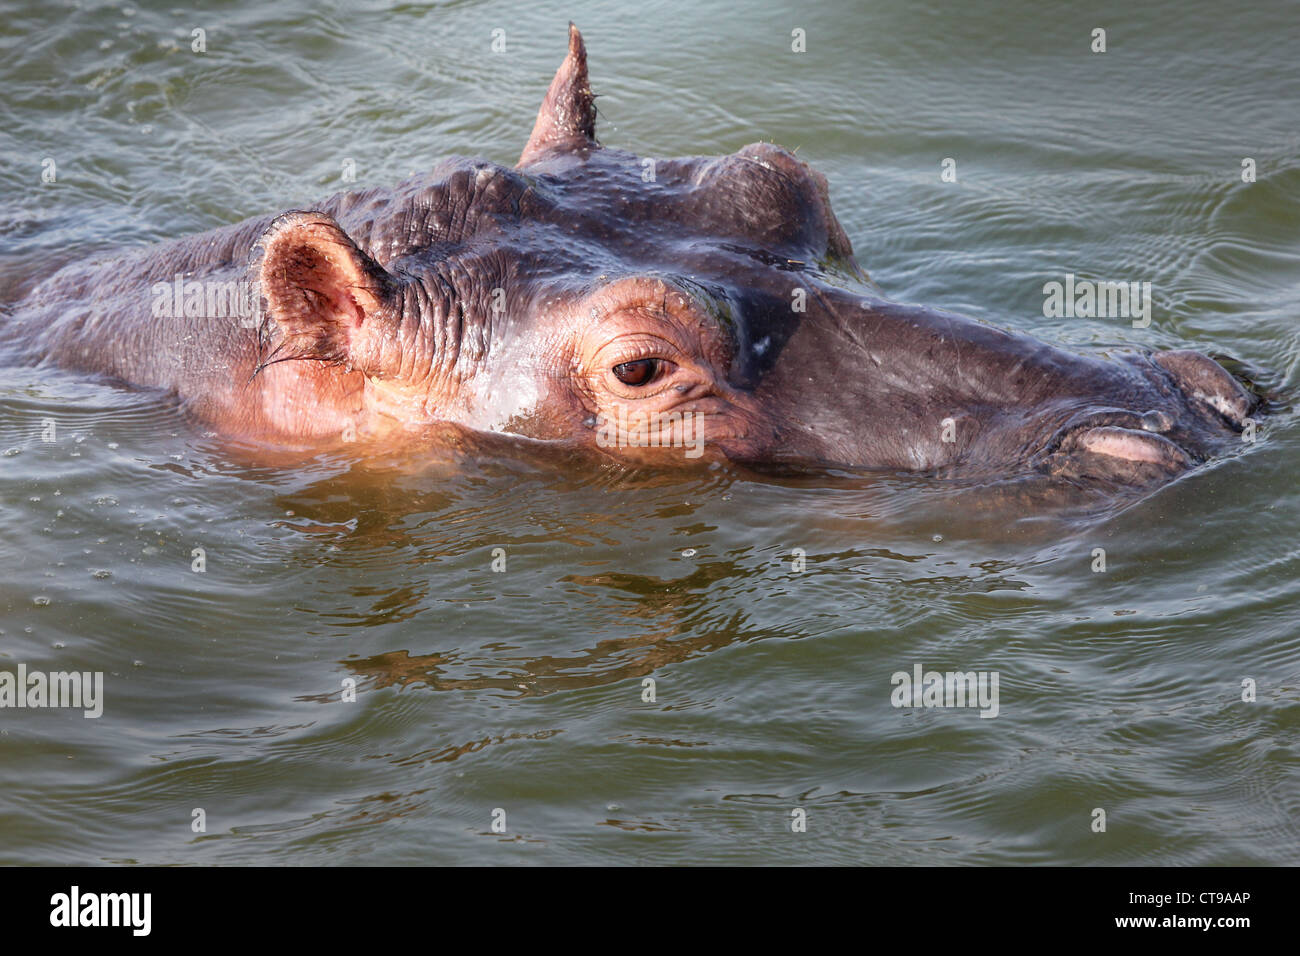 A WILD Hippopotamus Peers Out from the Water in the Kazinga Channel in Uganda, Africa. Stock Photo